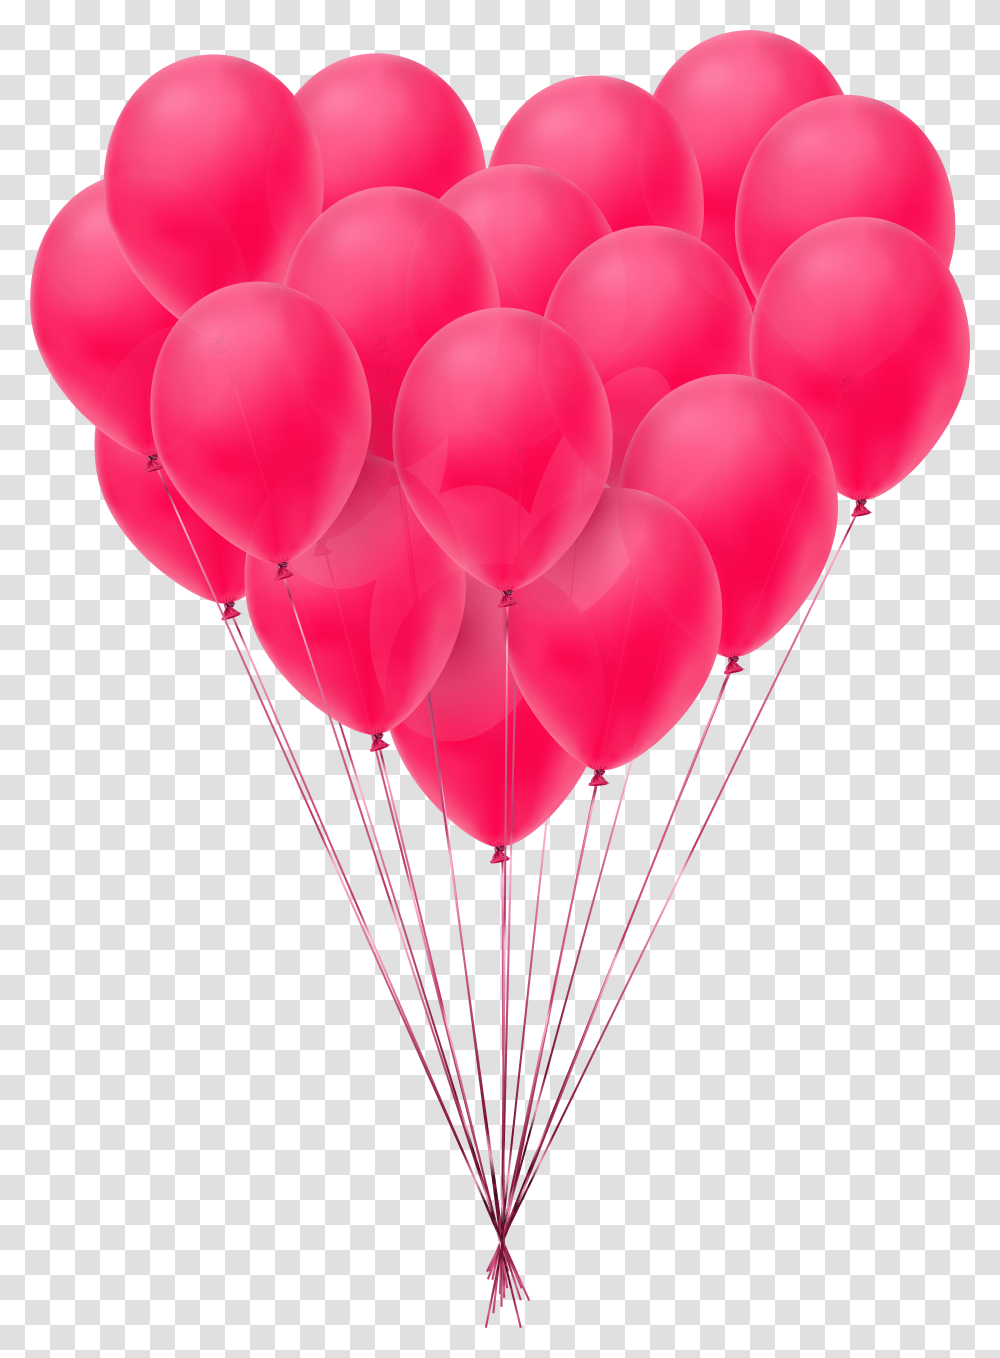 Valentine's Day Balloons Clip Art Image Balloons Bday Transparent Png